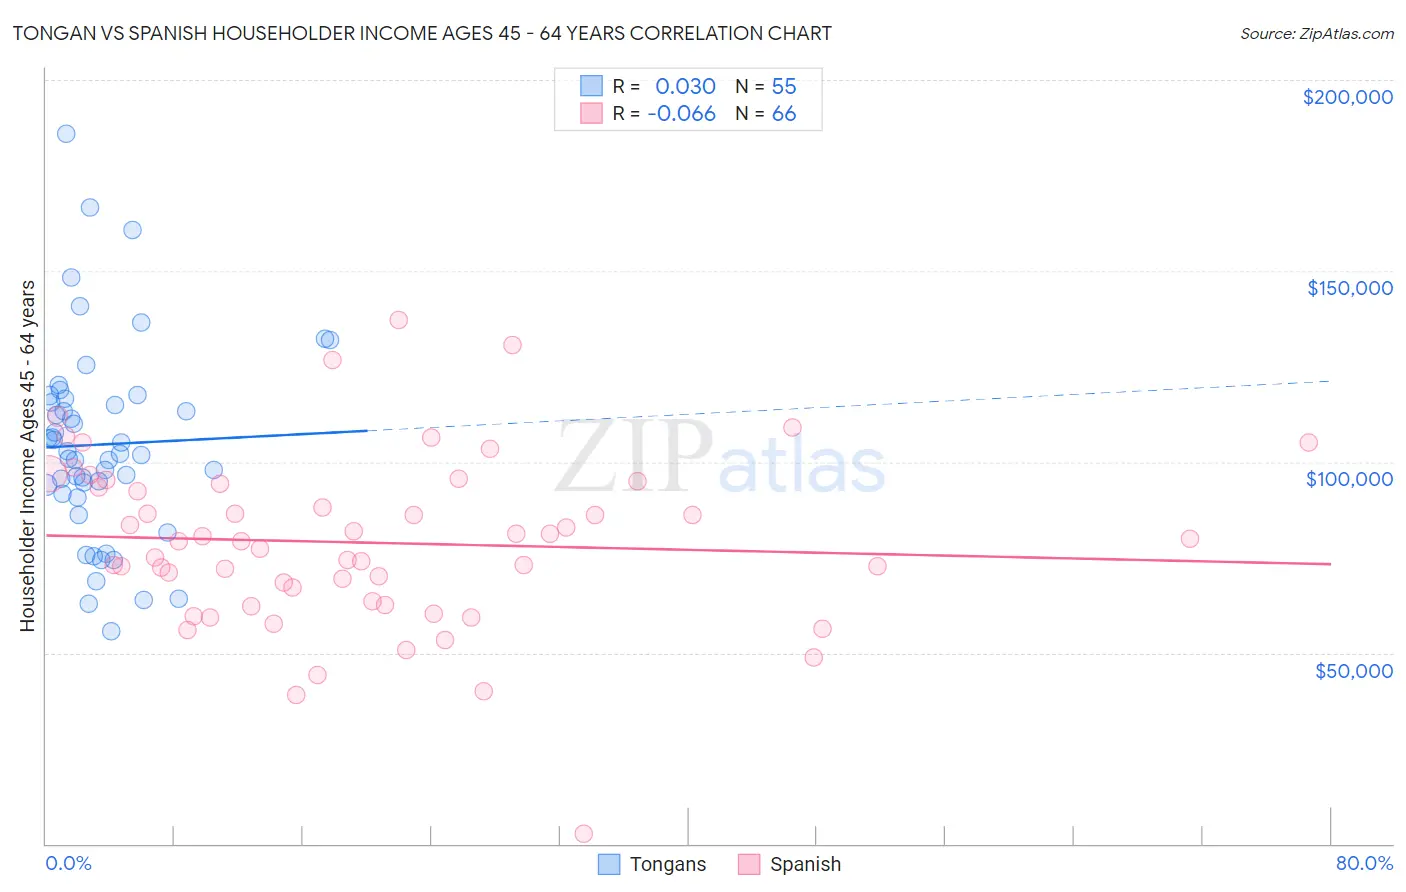 Tongan vs Spanish Householder Income Ages 45 - 64 years